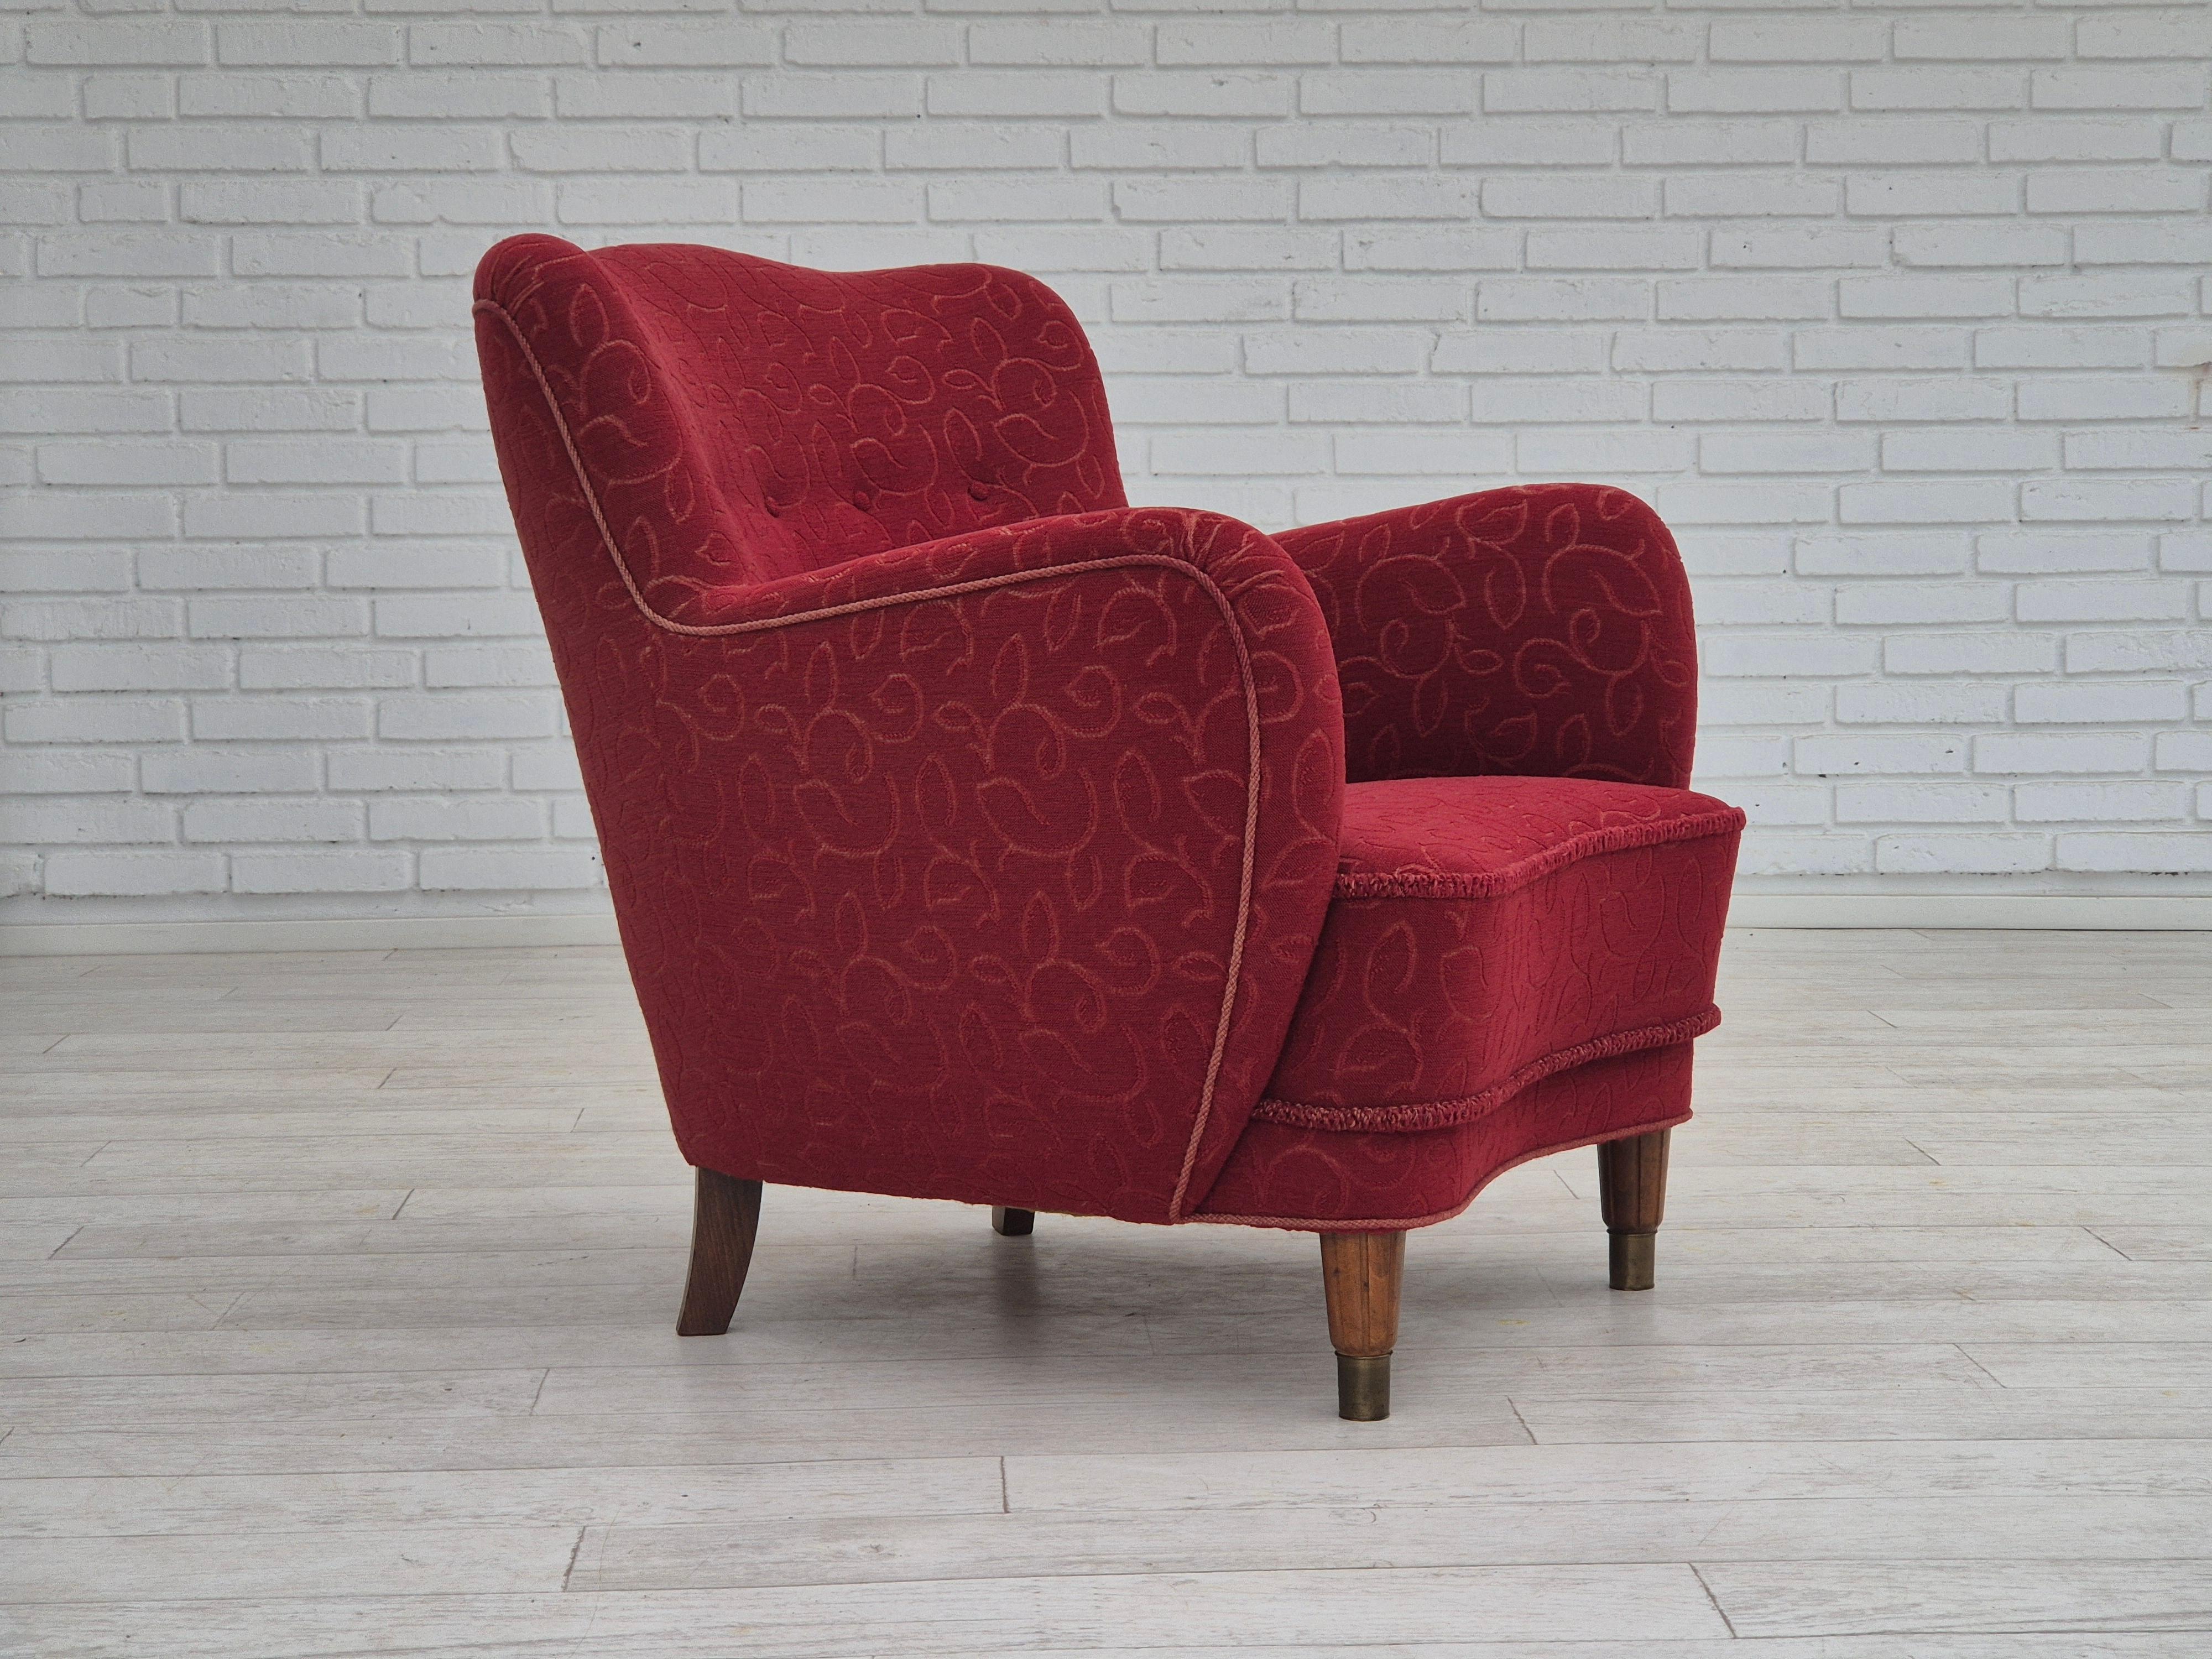 1960s, Danish design. Armchair in original very good condition: no smells and no stains. Original red cotton-wool furniture fabric. Beech legs with brass plugs, brass springs in the seat. Manufactured by Danish furniture manufacturer in about